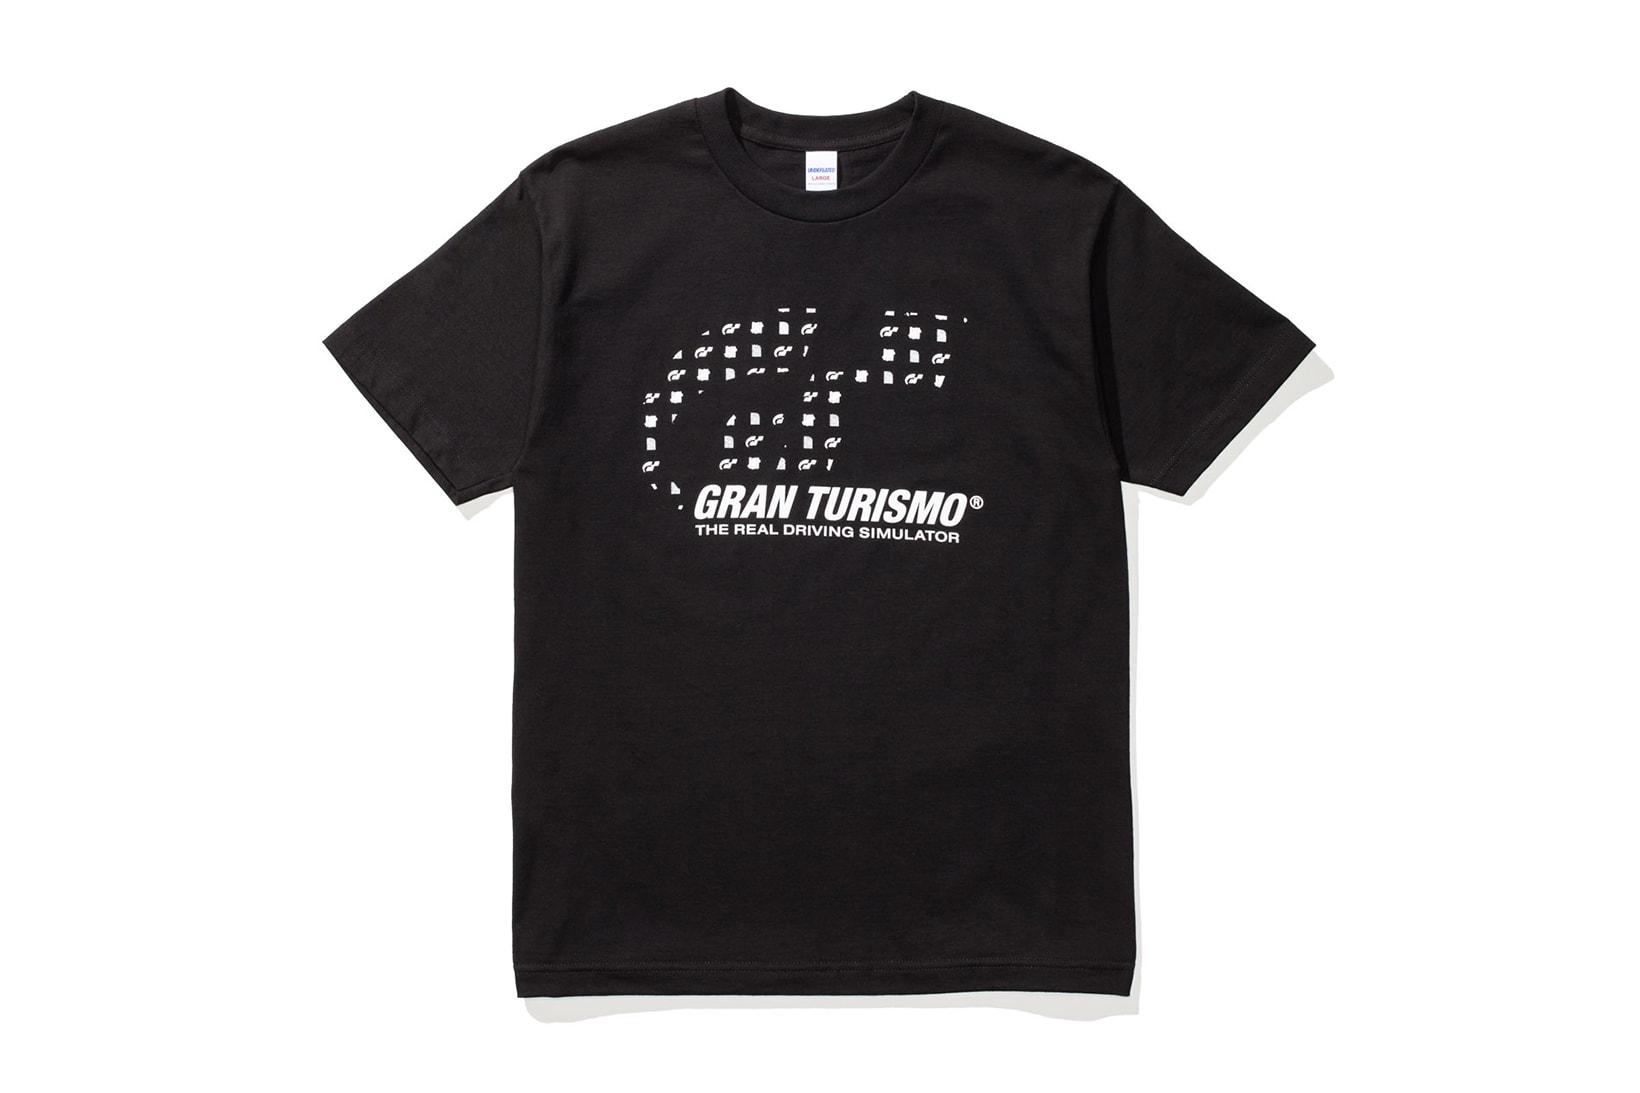 BAPE UNDEFEATED Gran Turismo Sport Collaboration A Bathing Ape UNDEFEATED Black White Grey T-shirt Hoodie Logo Branding California Sony Playstation